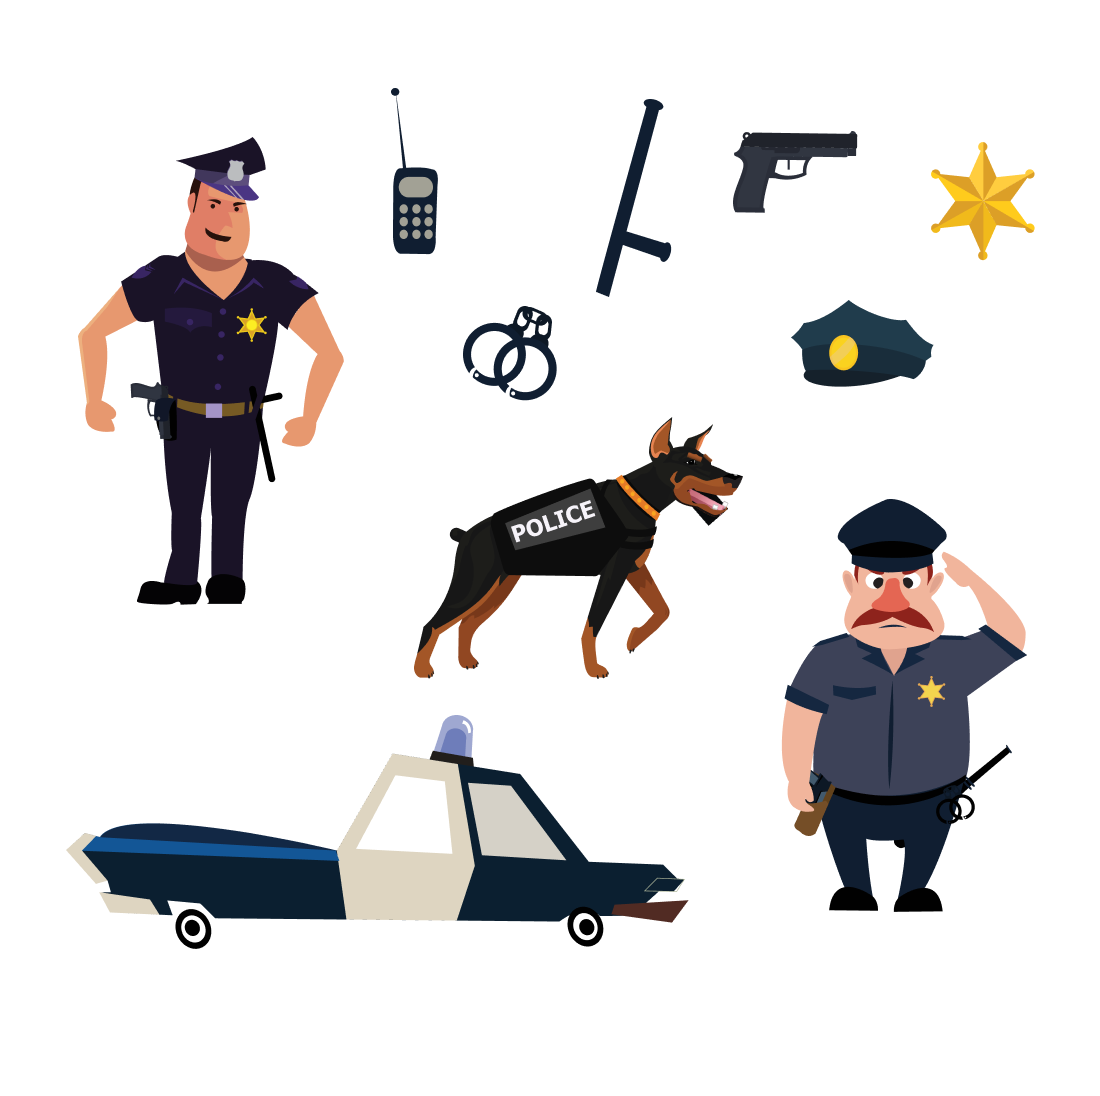 Police SVG Free cover.